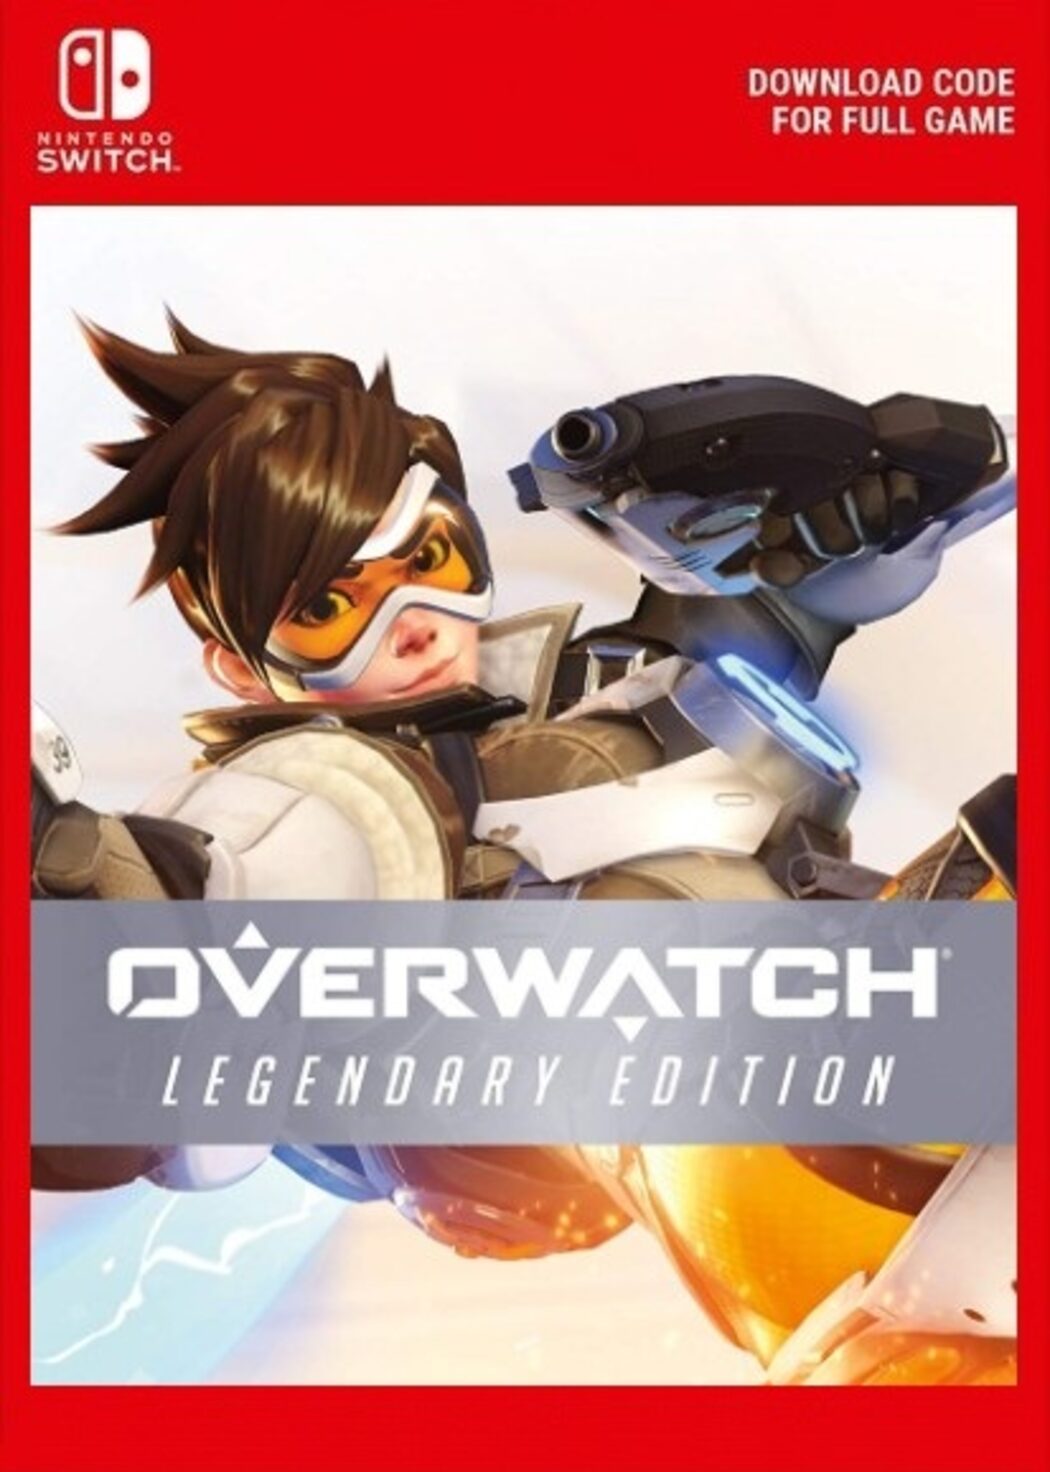 is overwatch free on nintendo switch